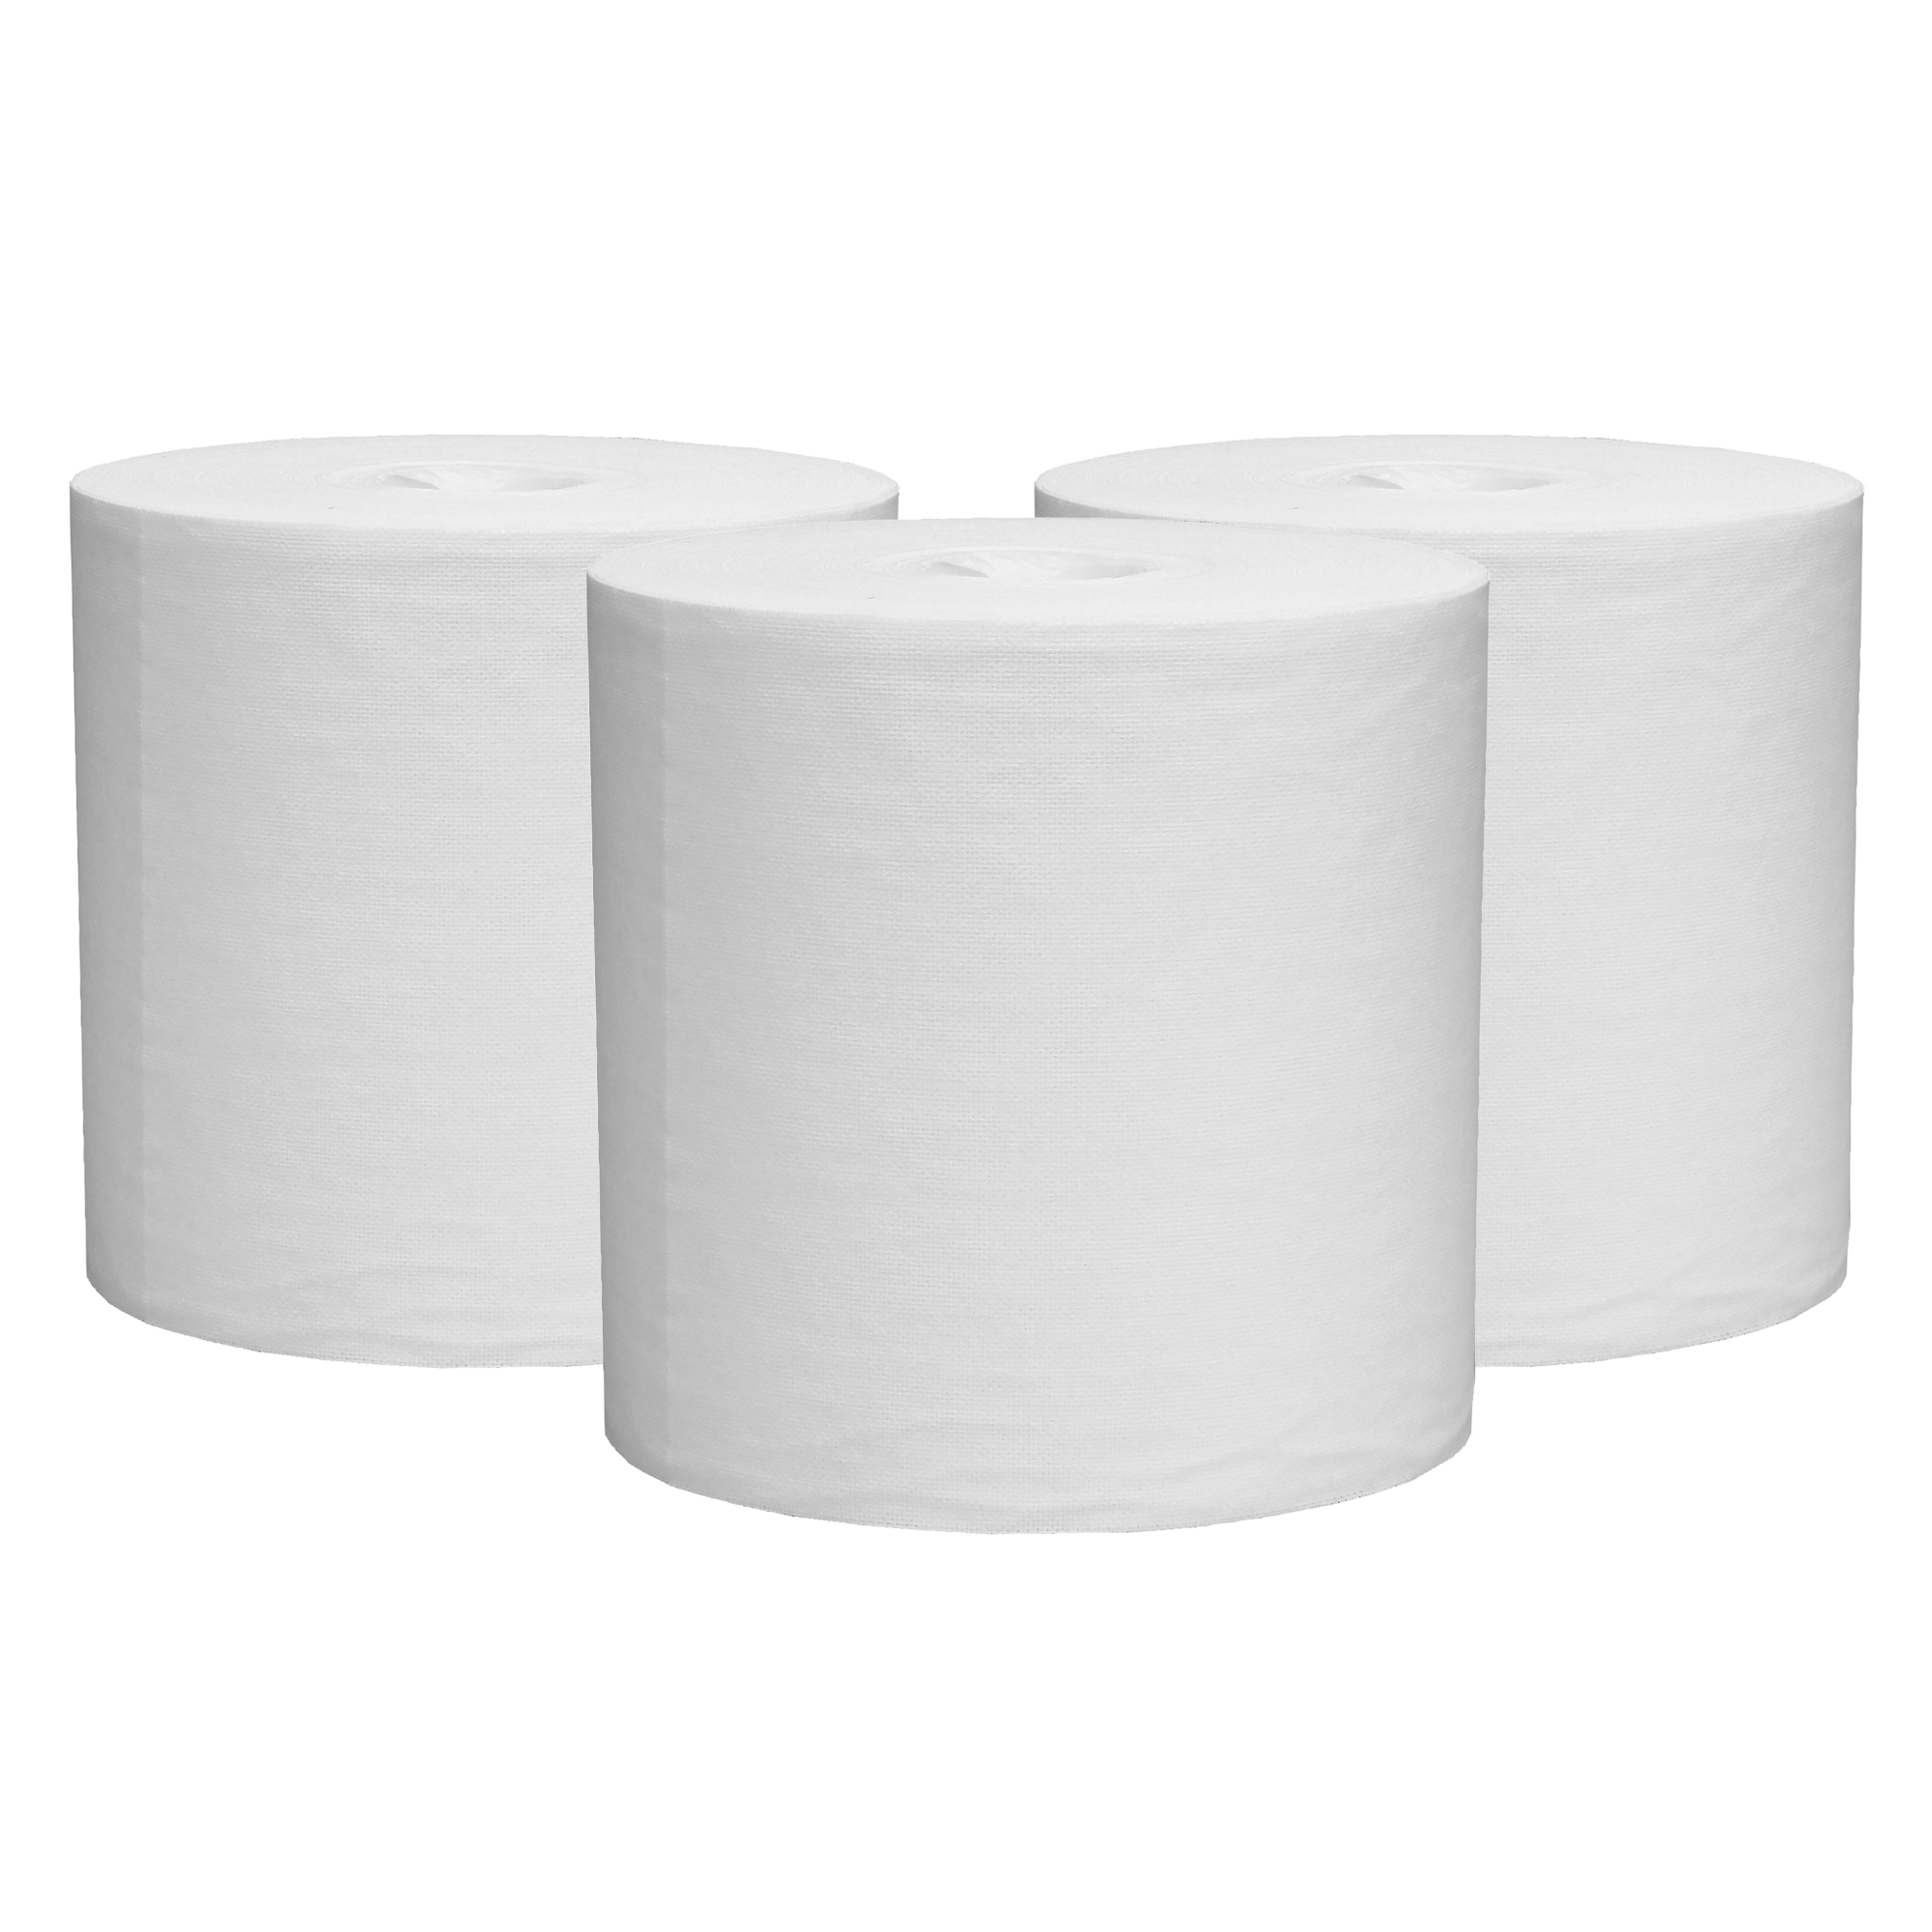 Picture of X70 Wipers, Center-Pull, 9 4/5 x 13 2/5, White, 275/Roll, 3 Rolls/Carton